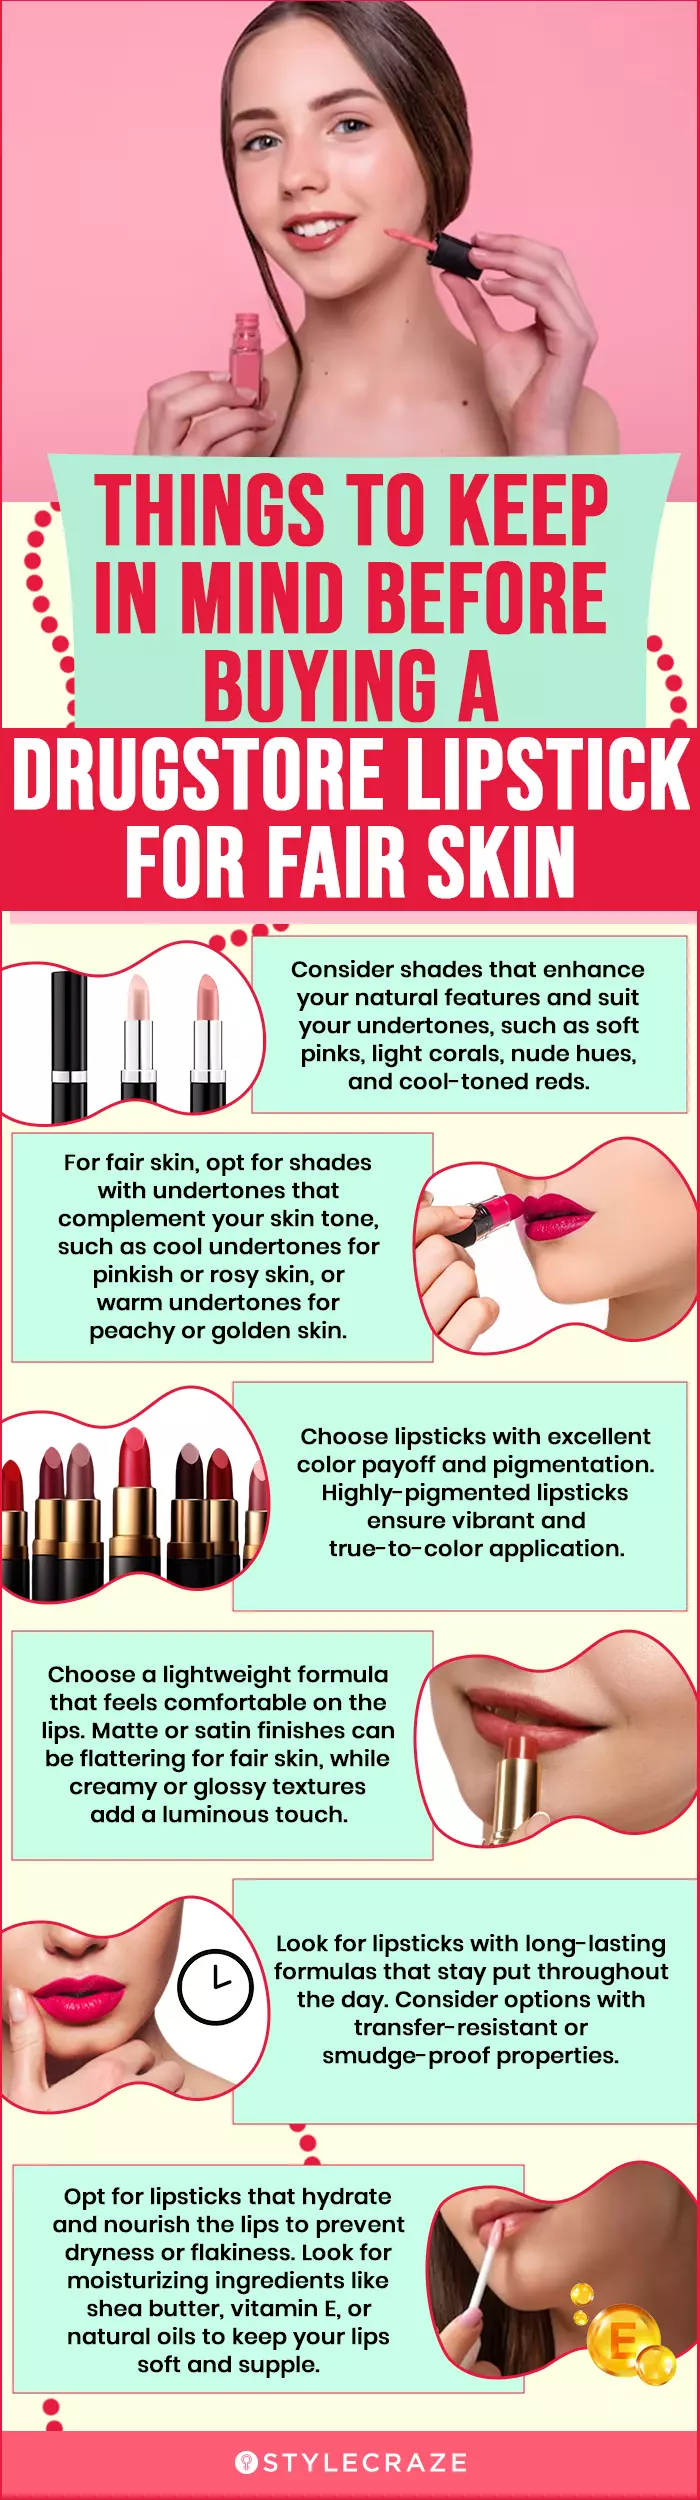 Things To Keep In Mind Before Buying A Drugstore Lipstick For Fair Skin(infographic)